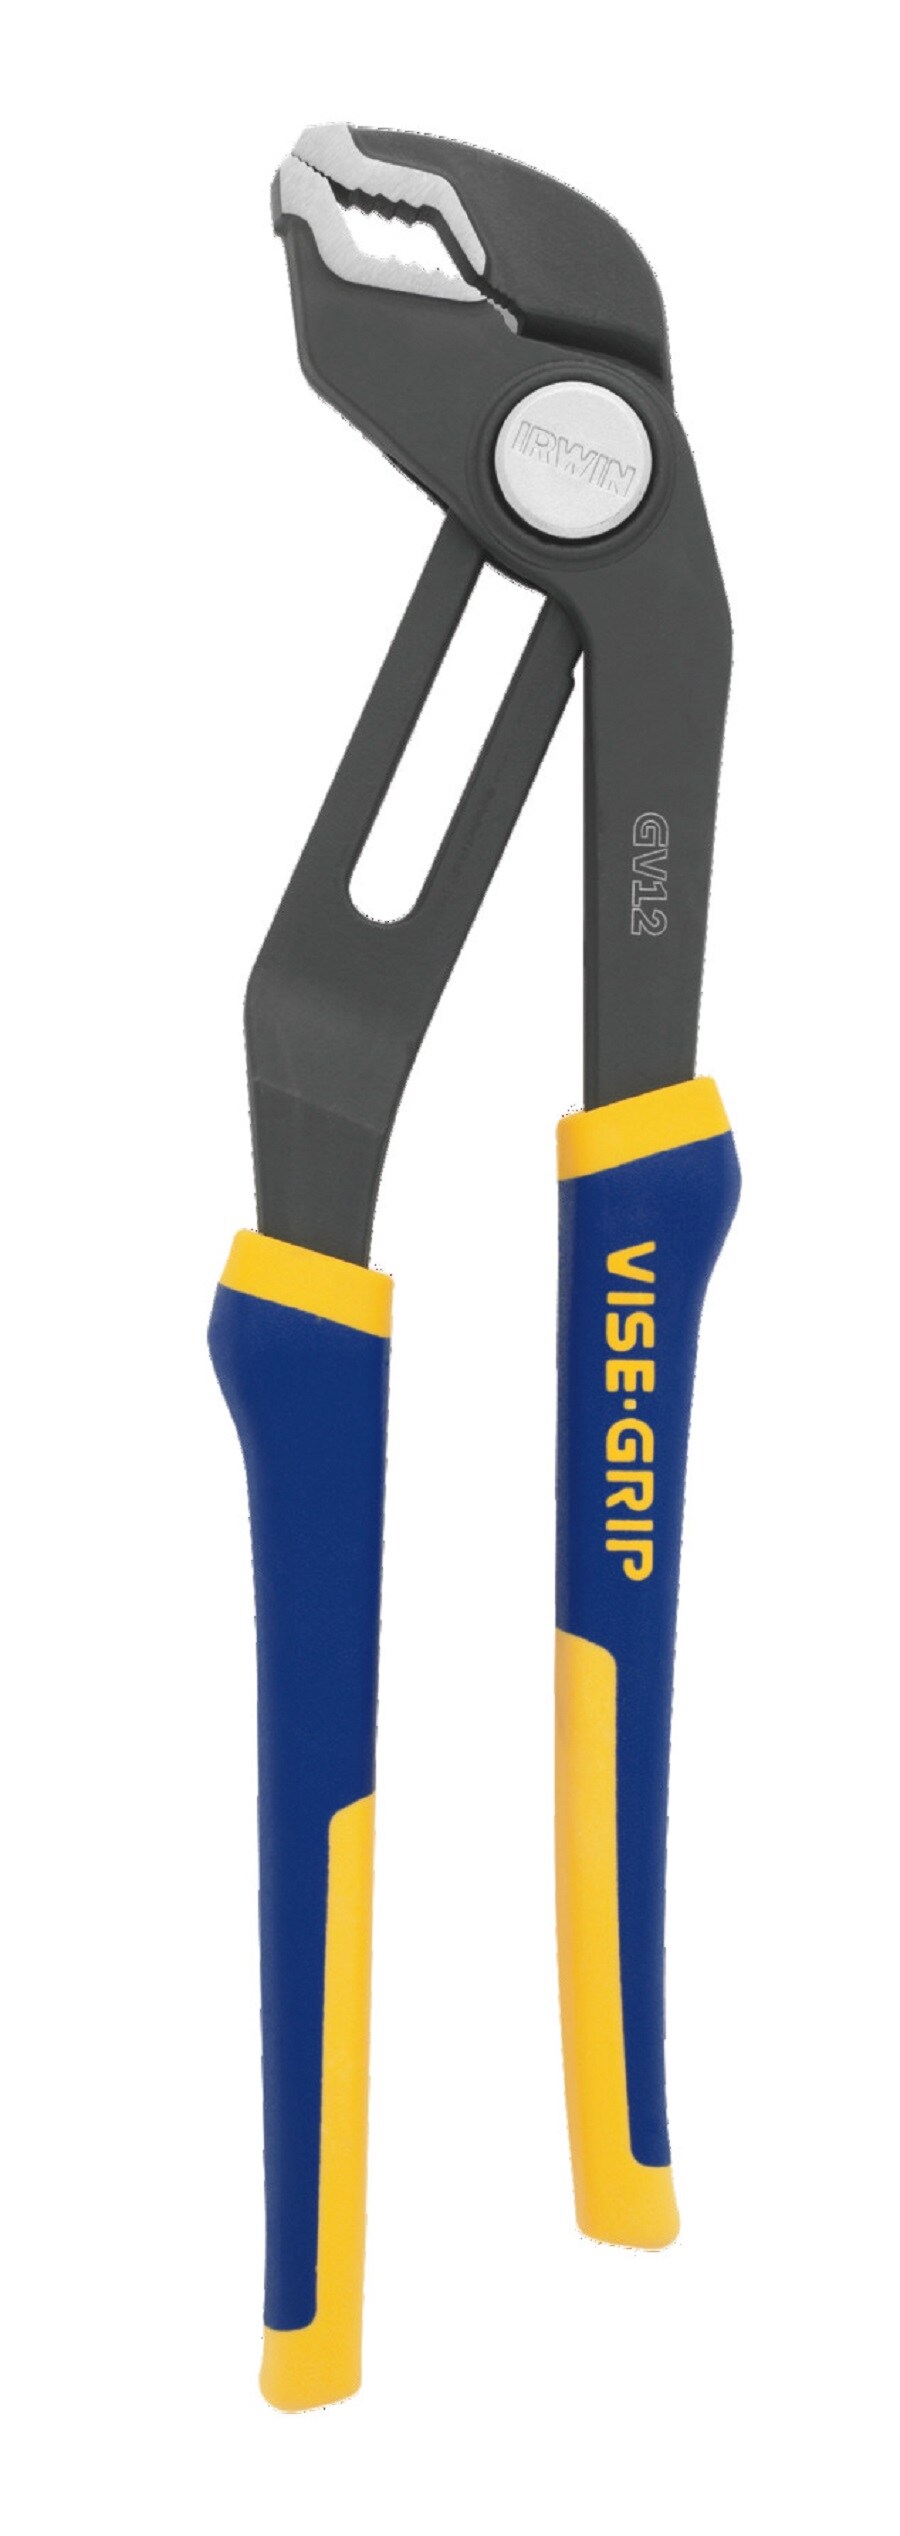 IRWIN 2078112 Gv12 Groovelock 12" V Jaw Pliers for sale online 